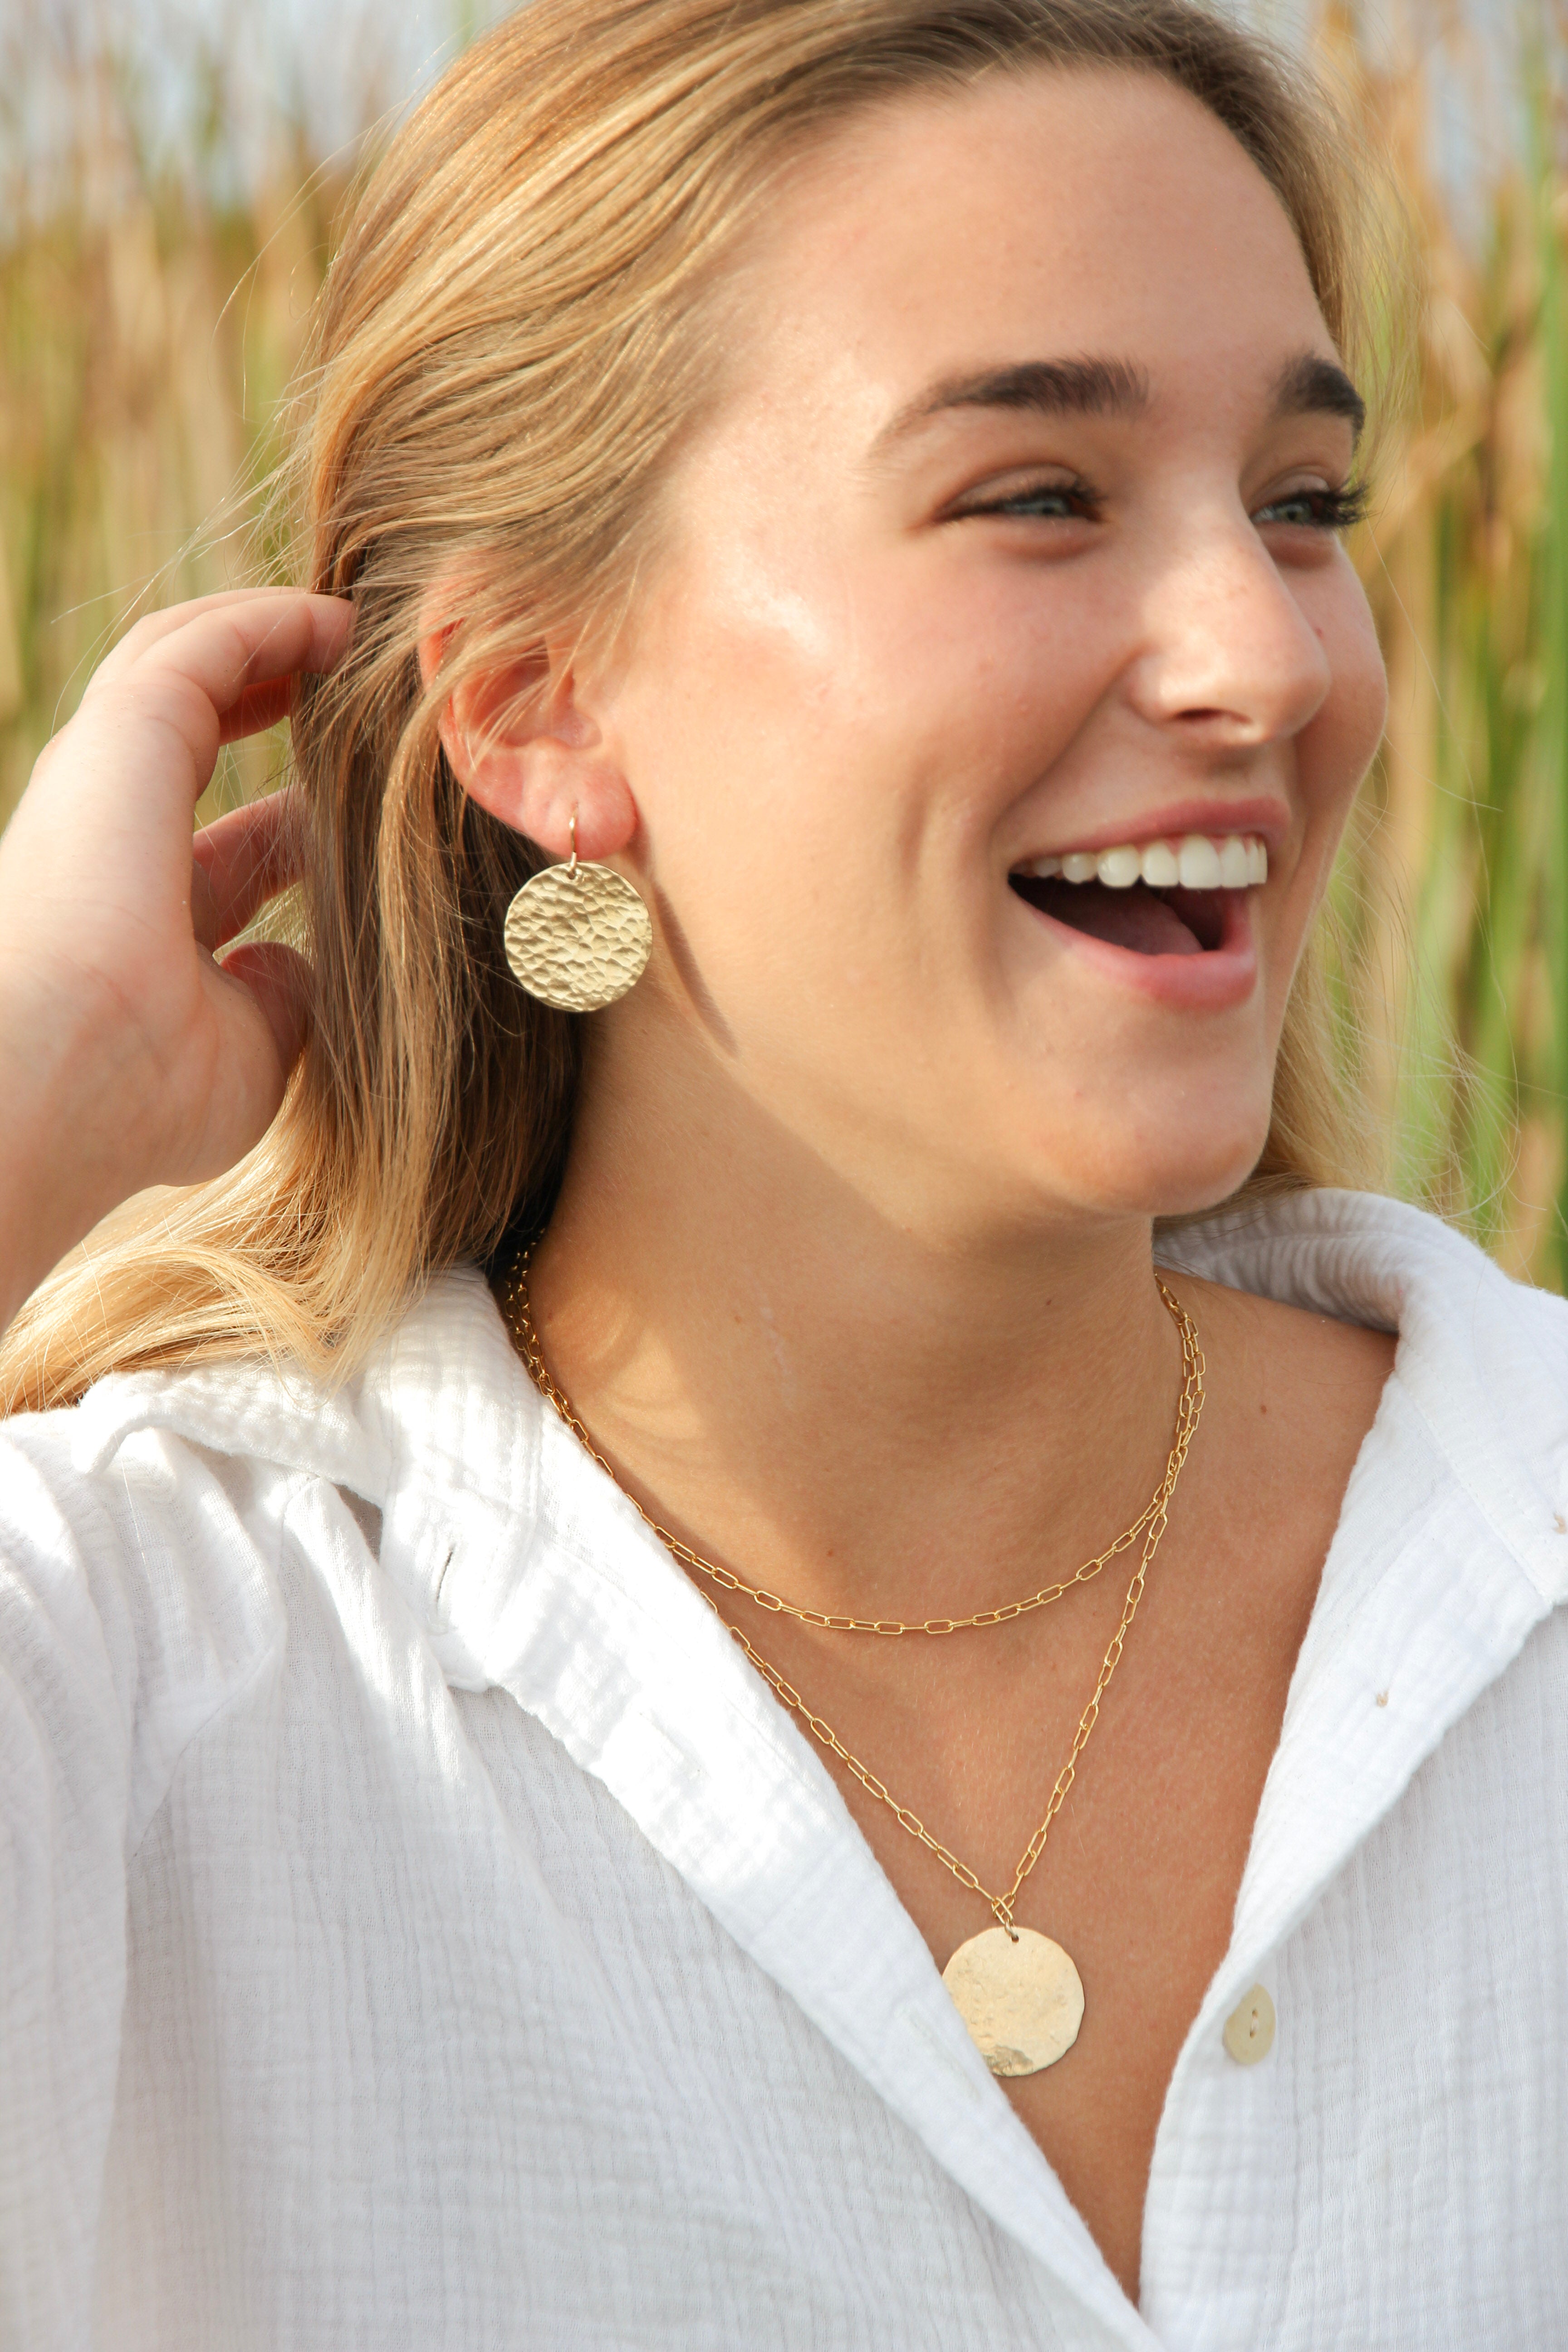 Large hammered gold disk earrings shown in a woman's ears.